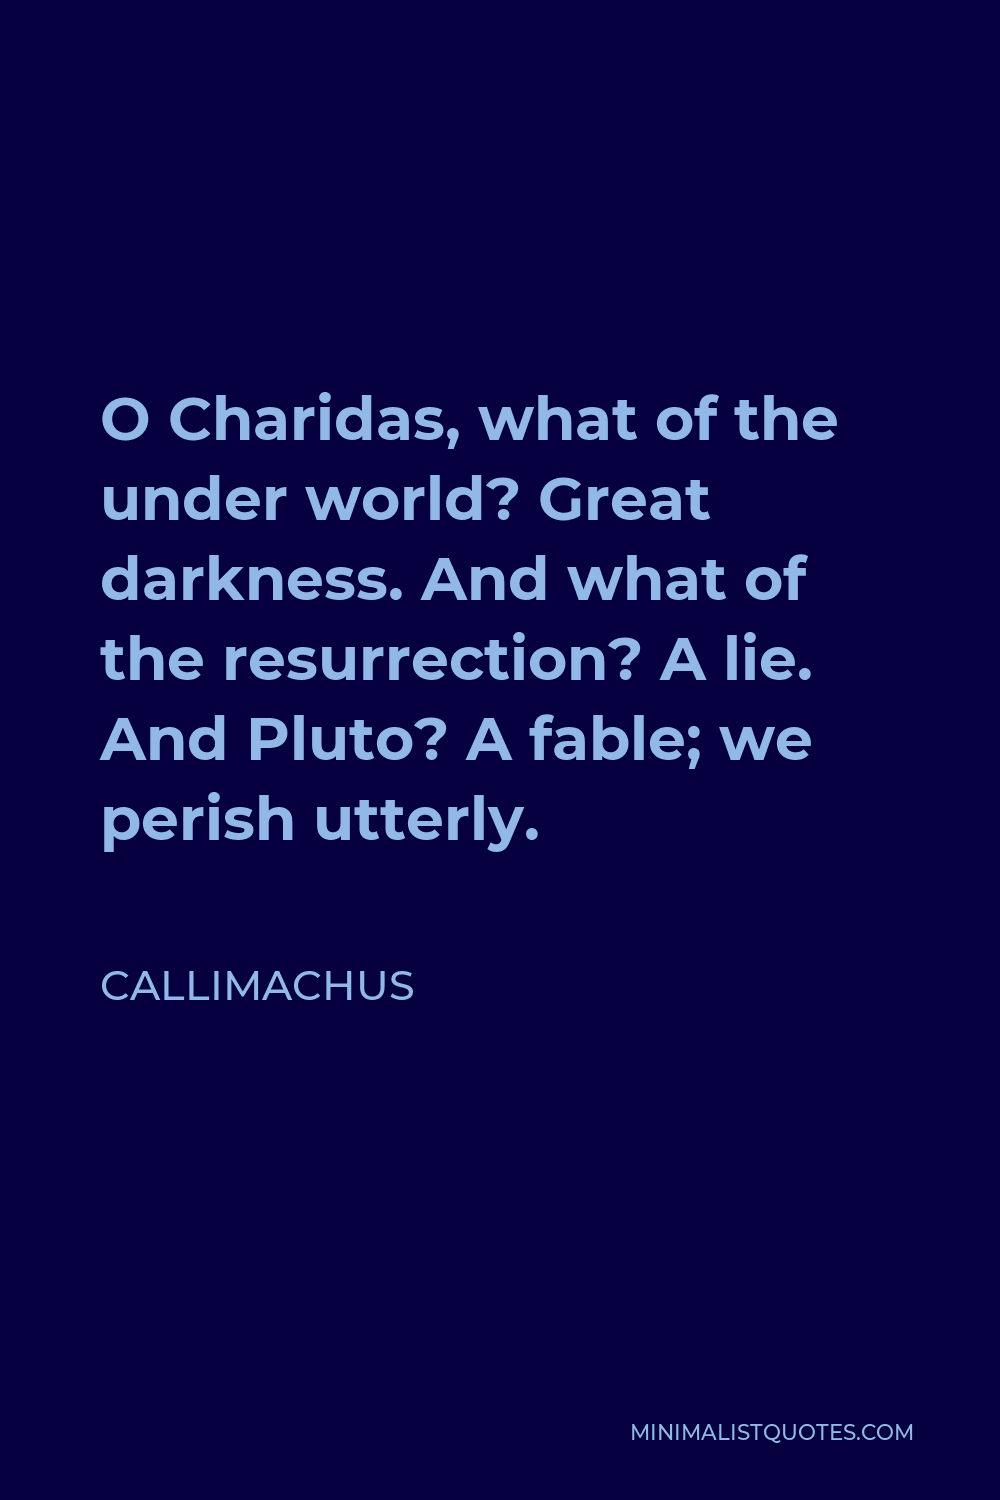 Callimachus Quote - O Charidas, what of the under world? Great darkness. And what of the resurrection? A lie. And Pluto? A fable; we perish utterly.